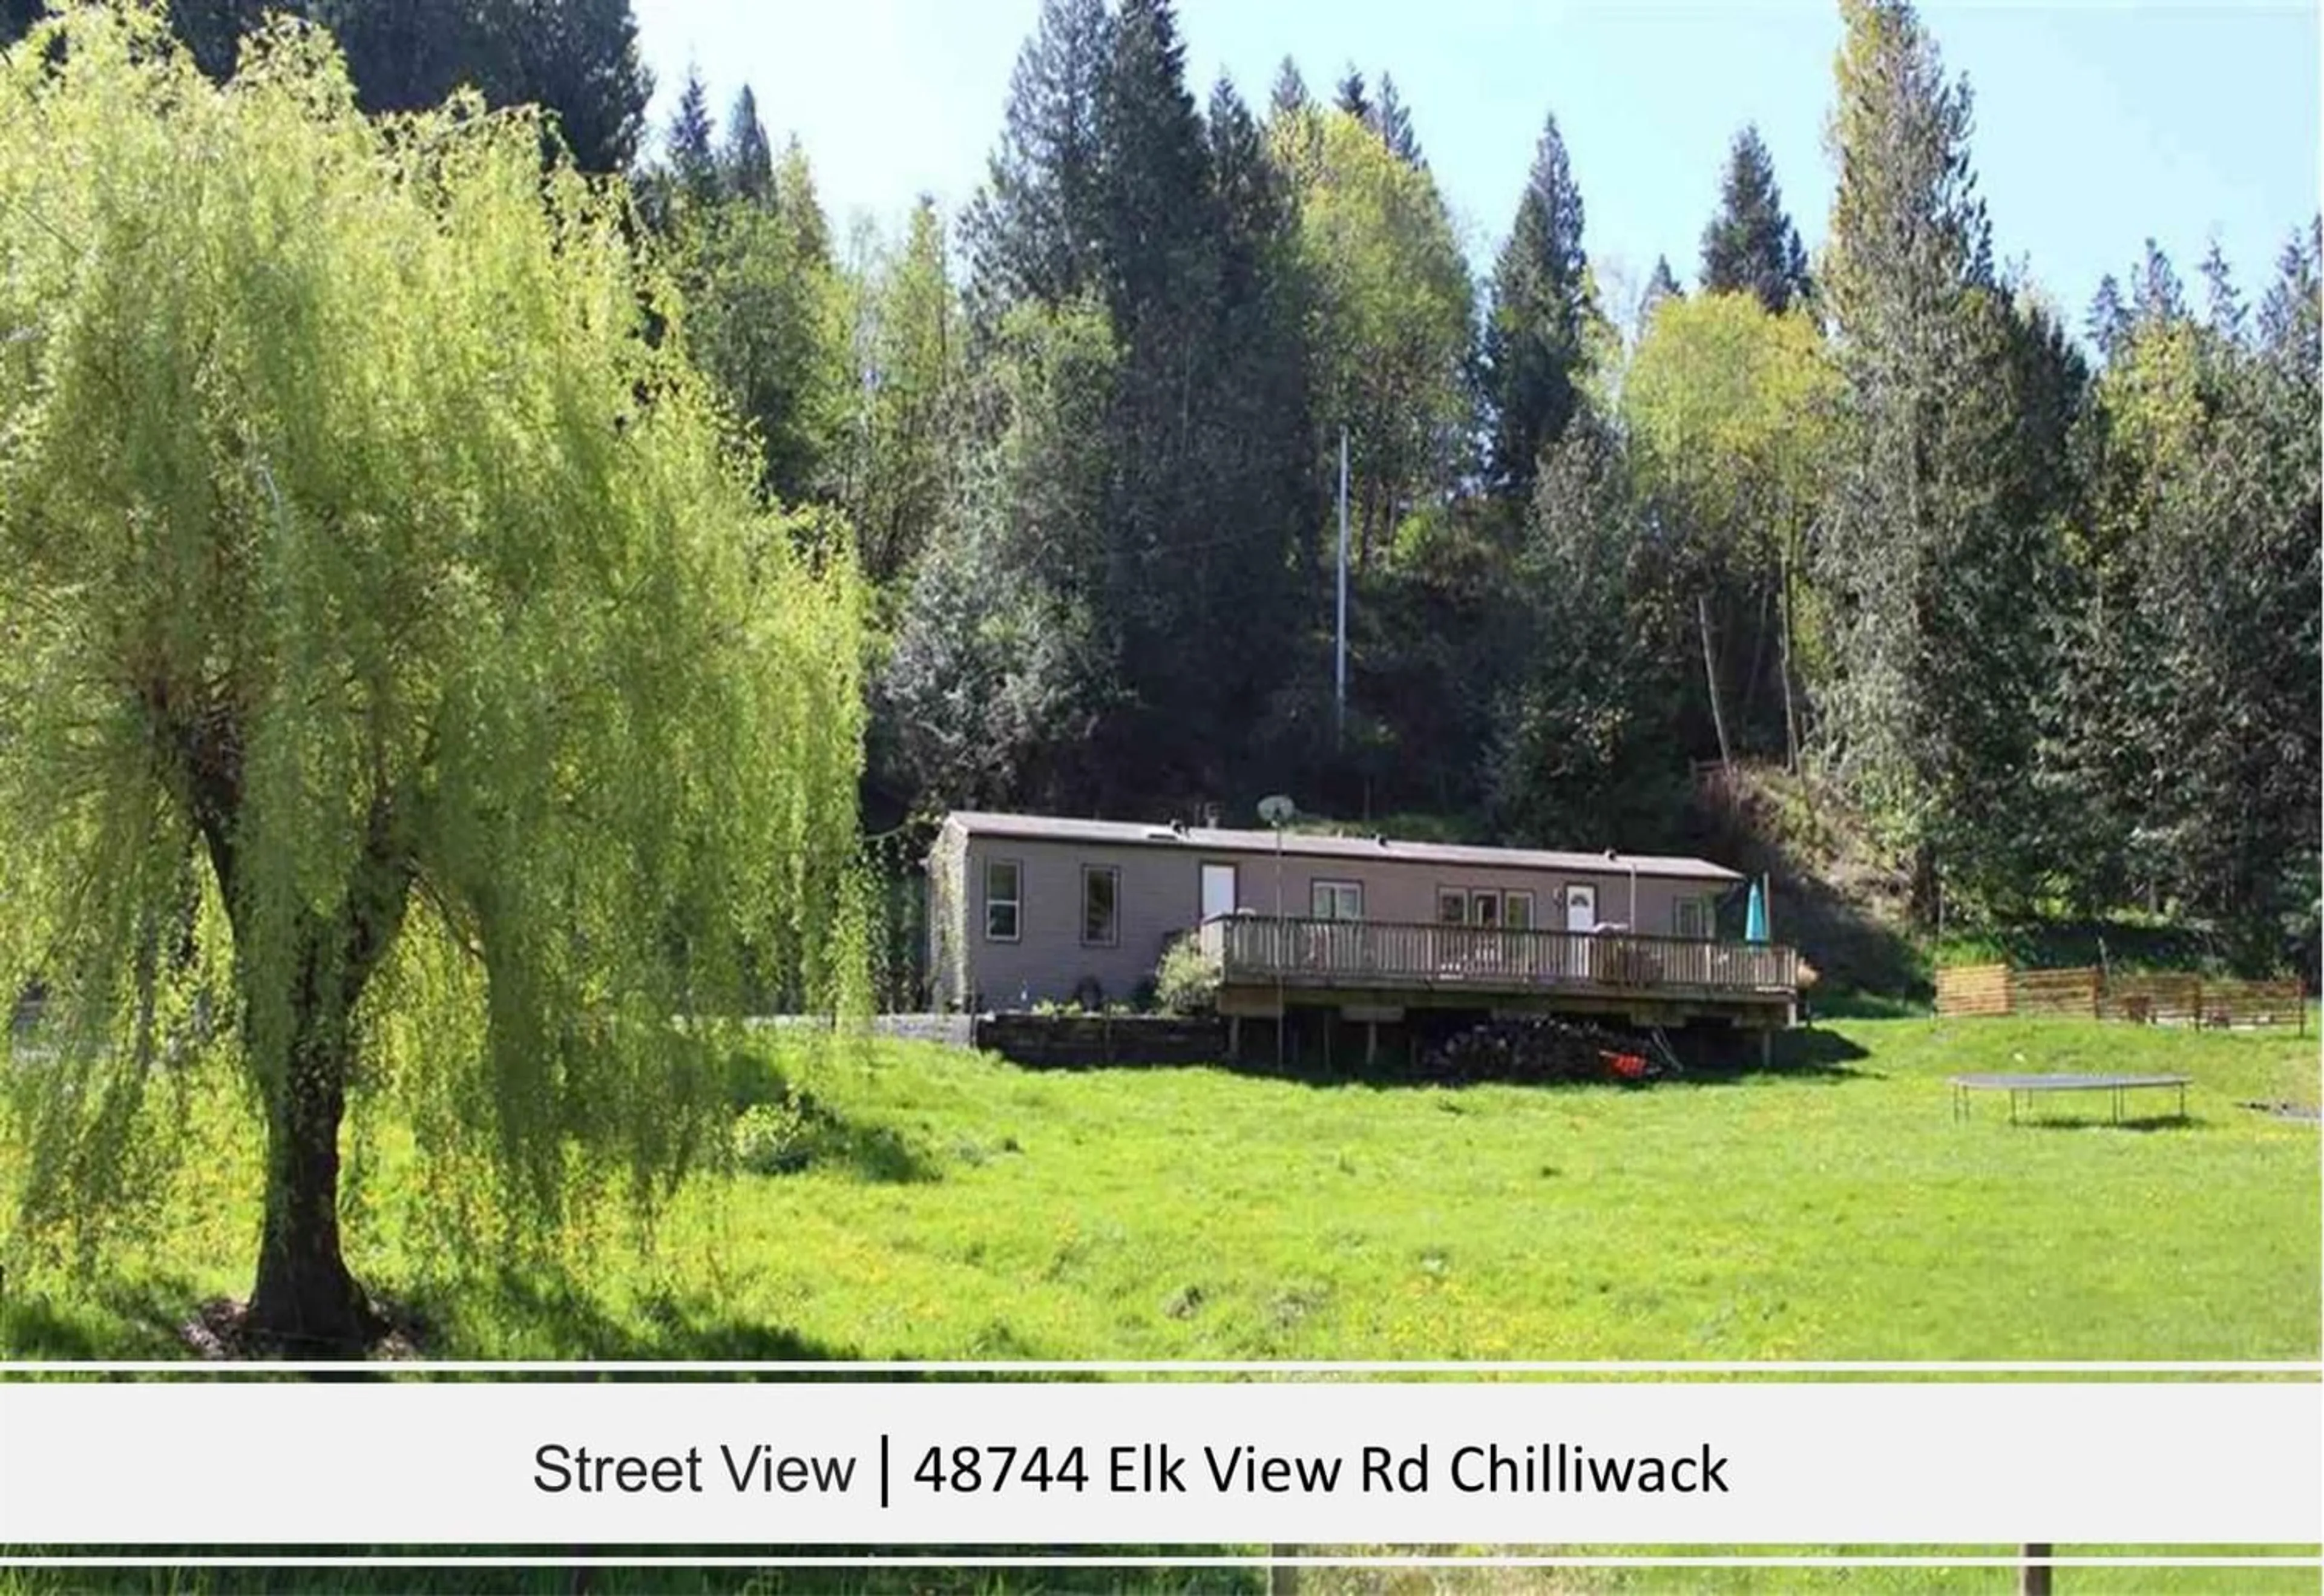 Street view for 48744 ELK VIEW ROAD, Chilliwack British Columbia V4Z1G9